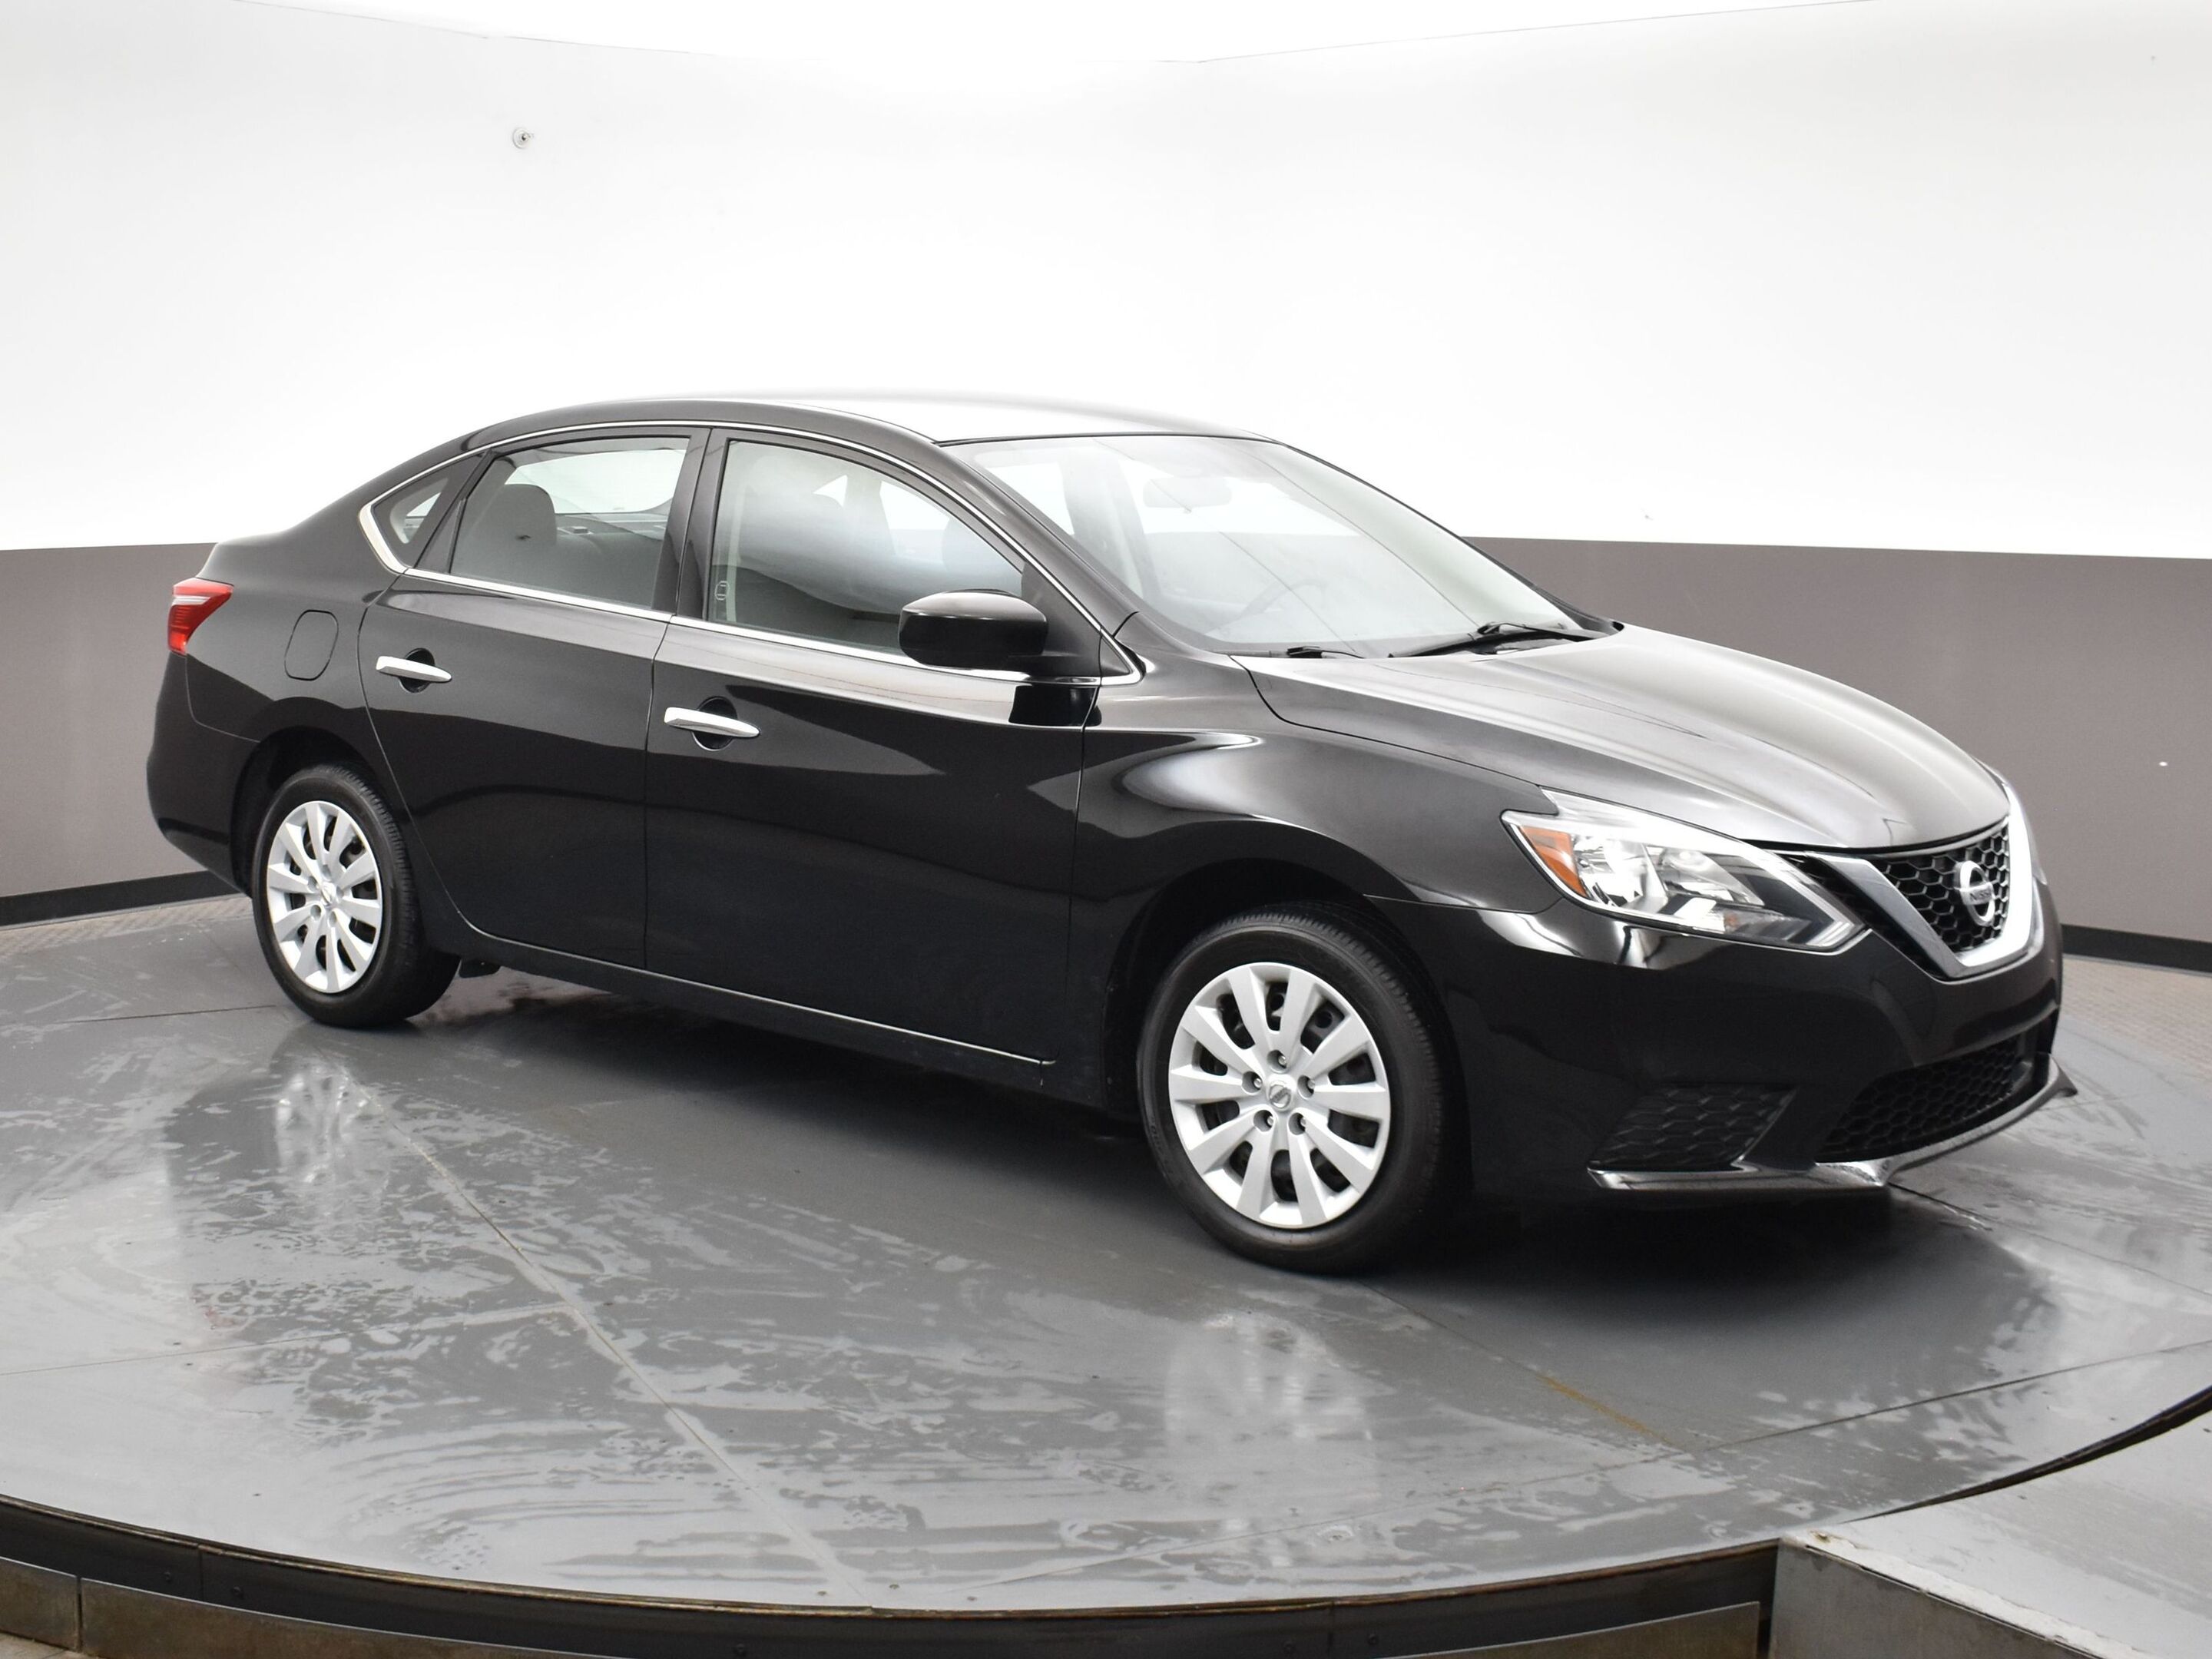 2019 Nissan Sentra S Auto Black A/C , bluetooth, touch screen monitor